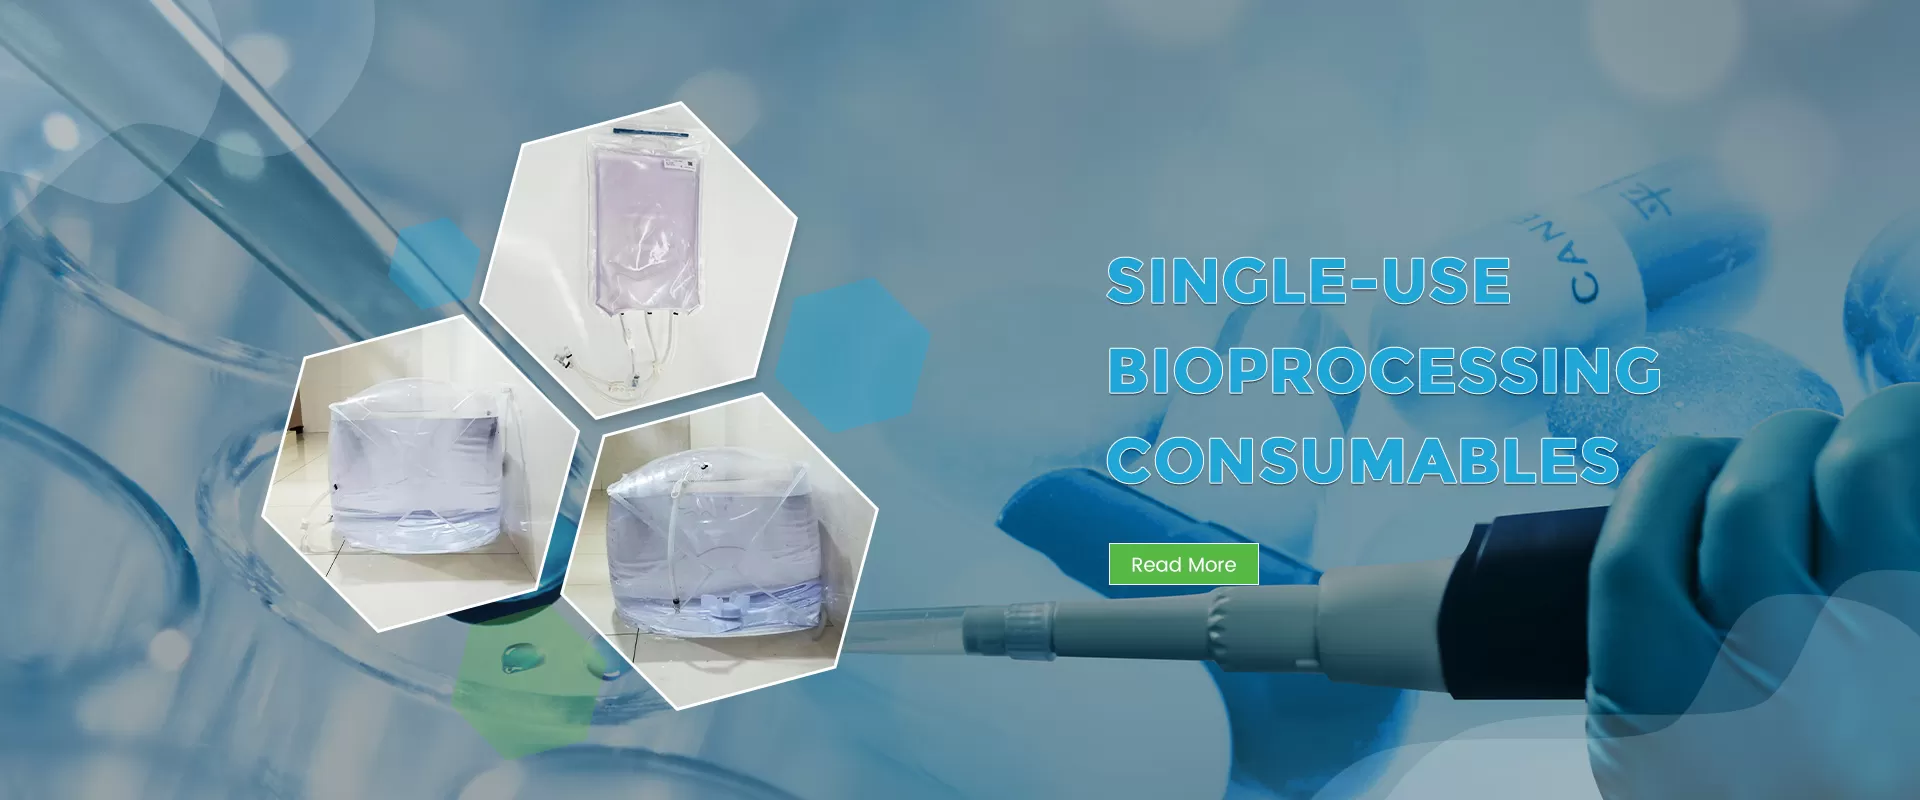 SINGLE-USE BIOPROCESSING consumables